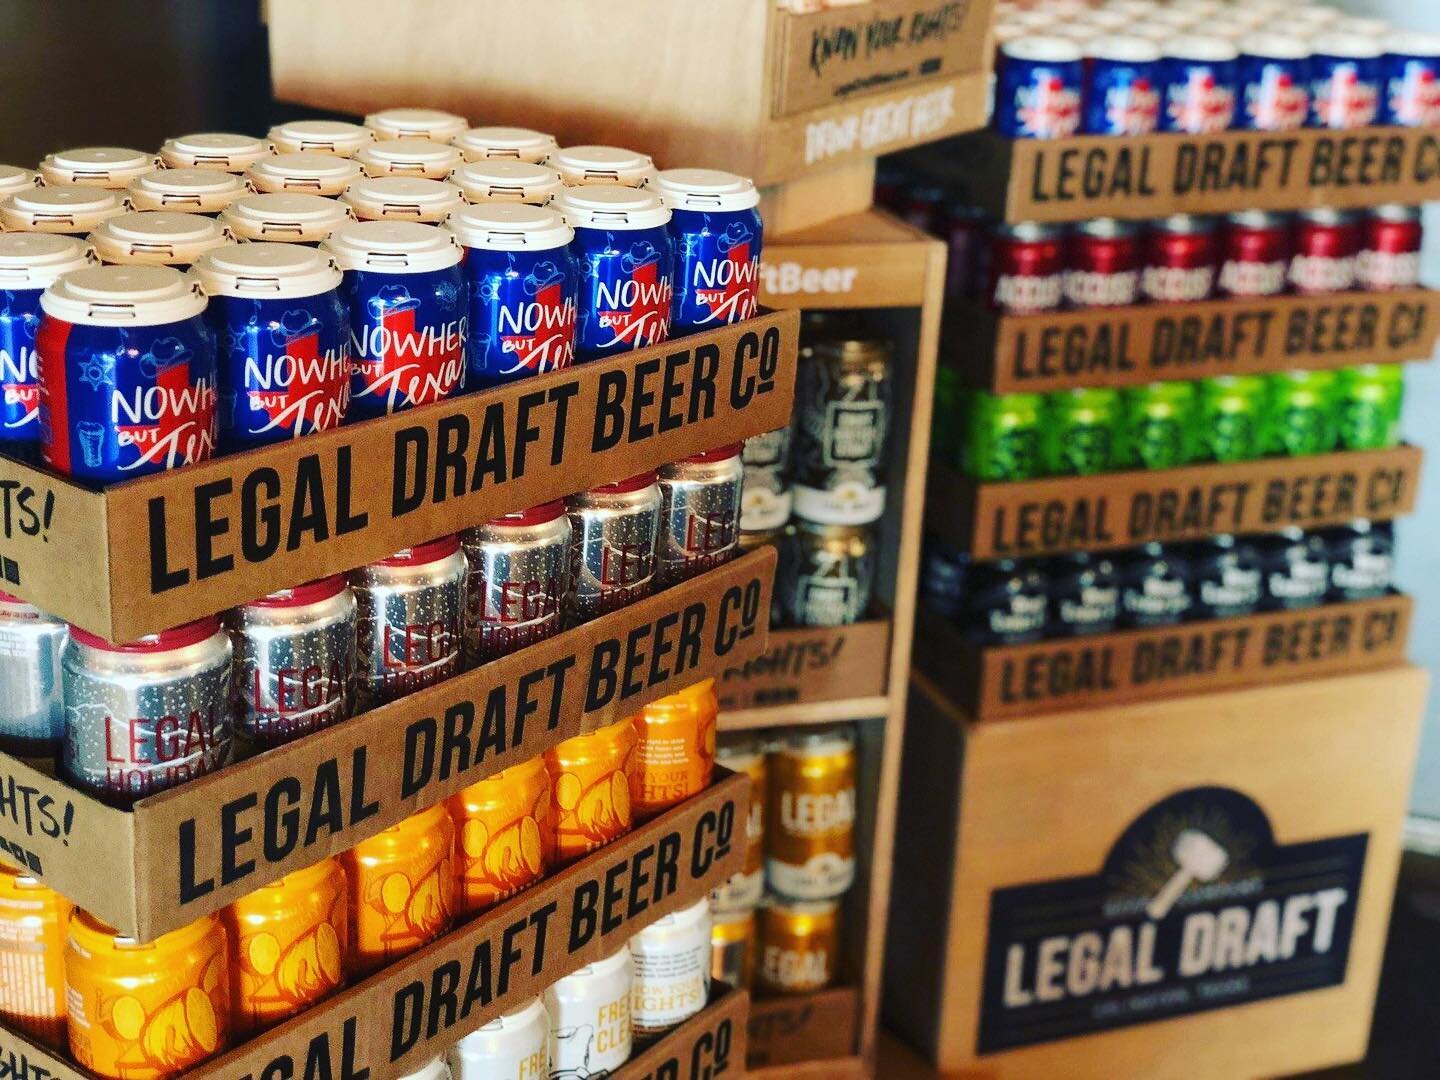 Have you seen some of our retro cans around the metroplex? Don&rsquo;t worry, it is perfectly good, new and fresh beer! Same new fresh flavors, just cool older designs! Drink up, friends!